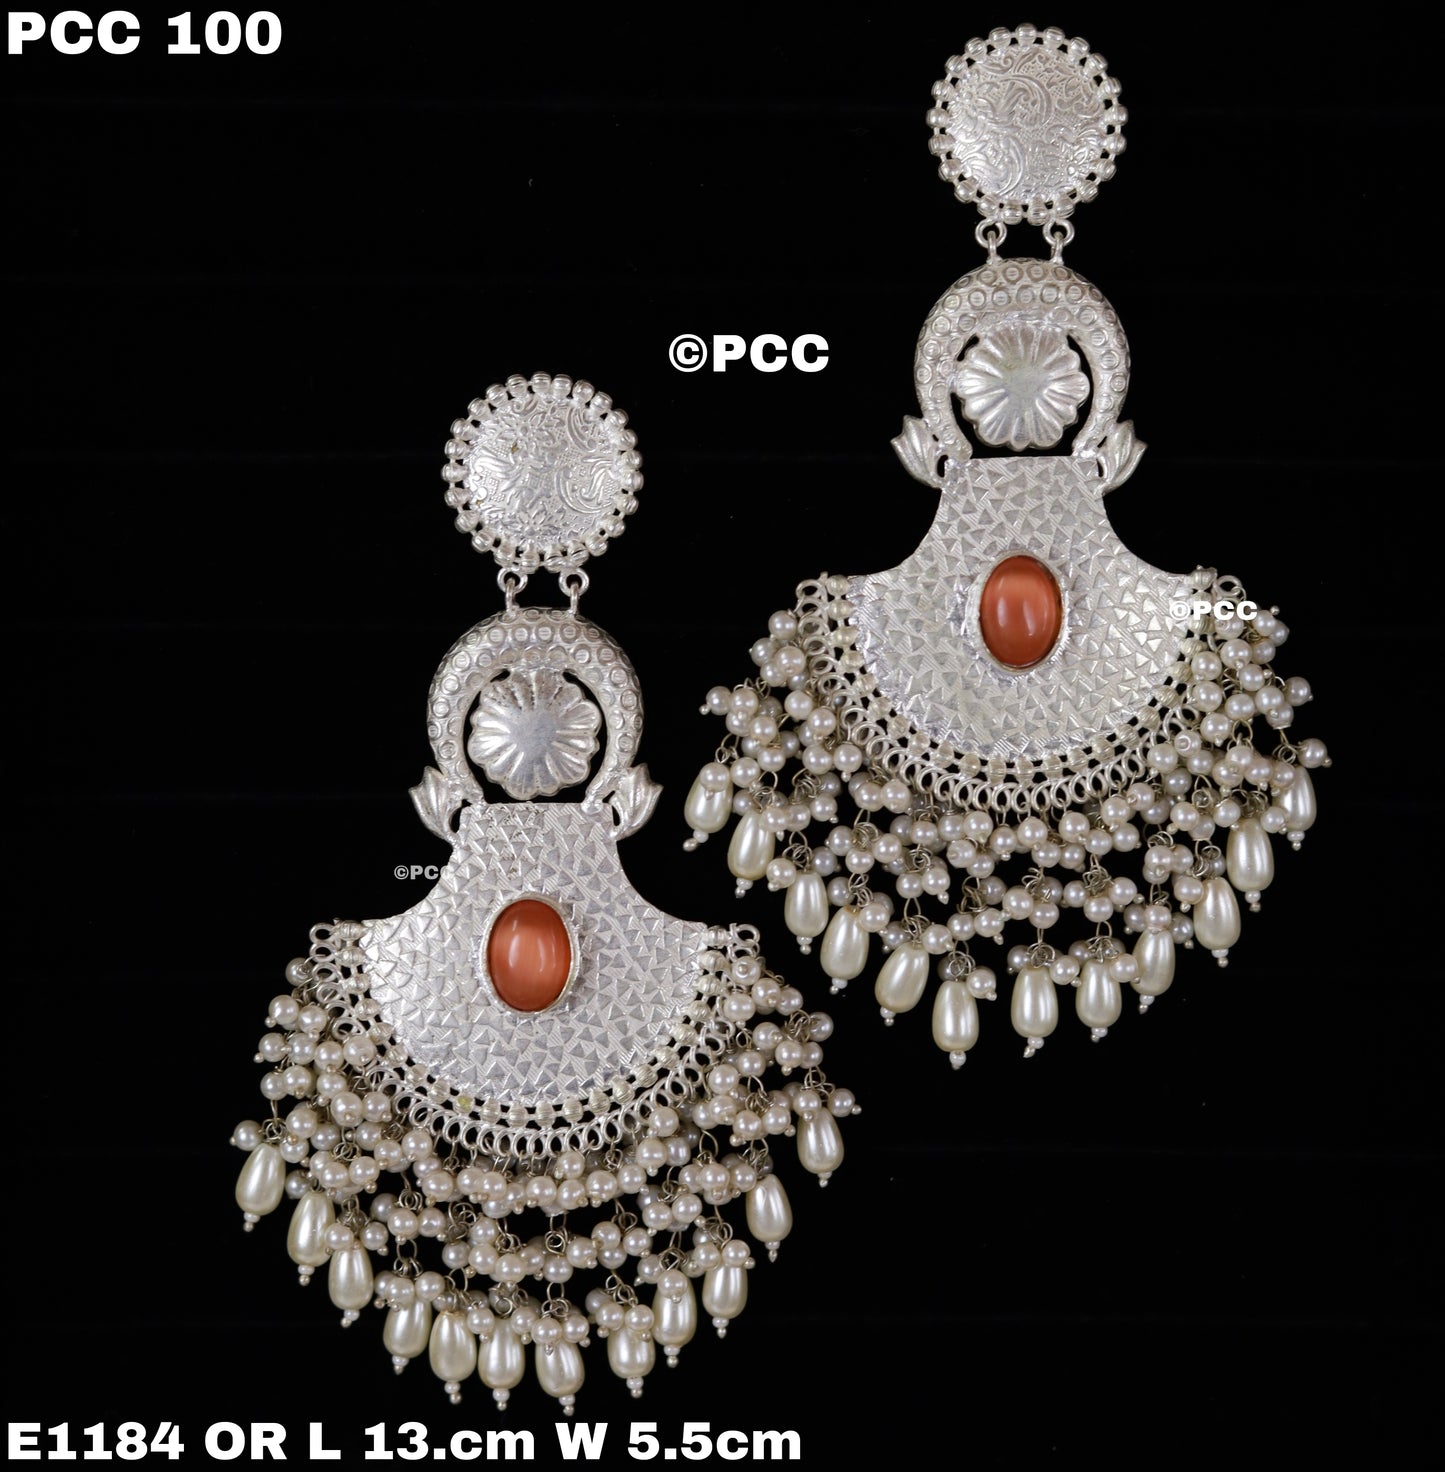 TRADITIONAL STYLE OXIDIZED EARRINGS